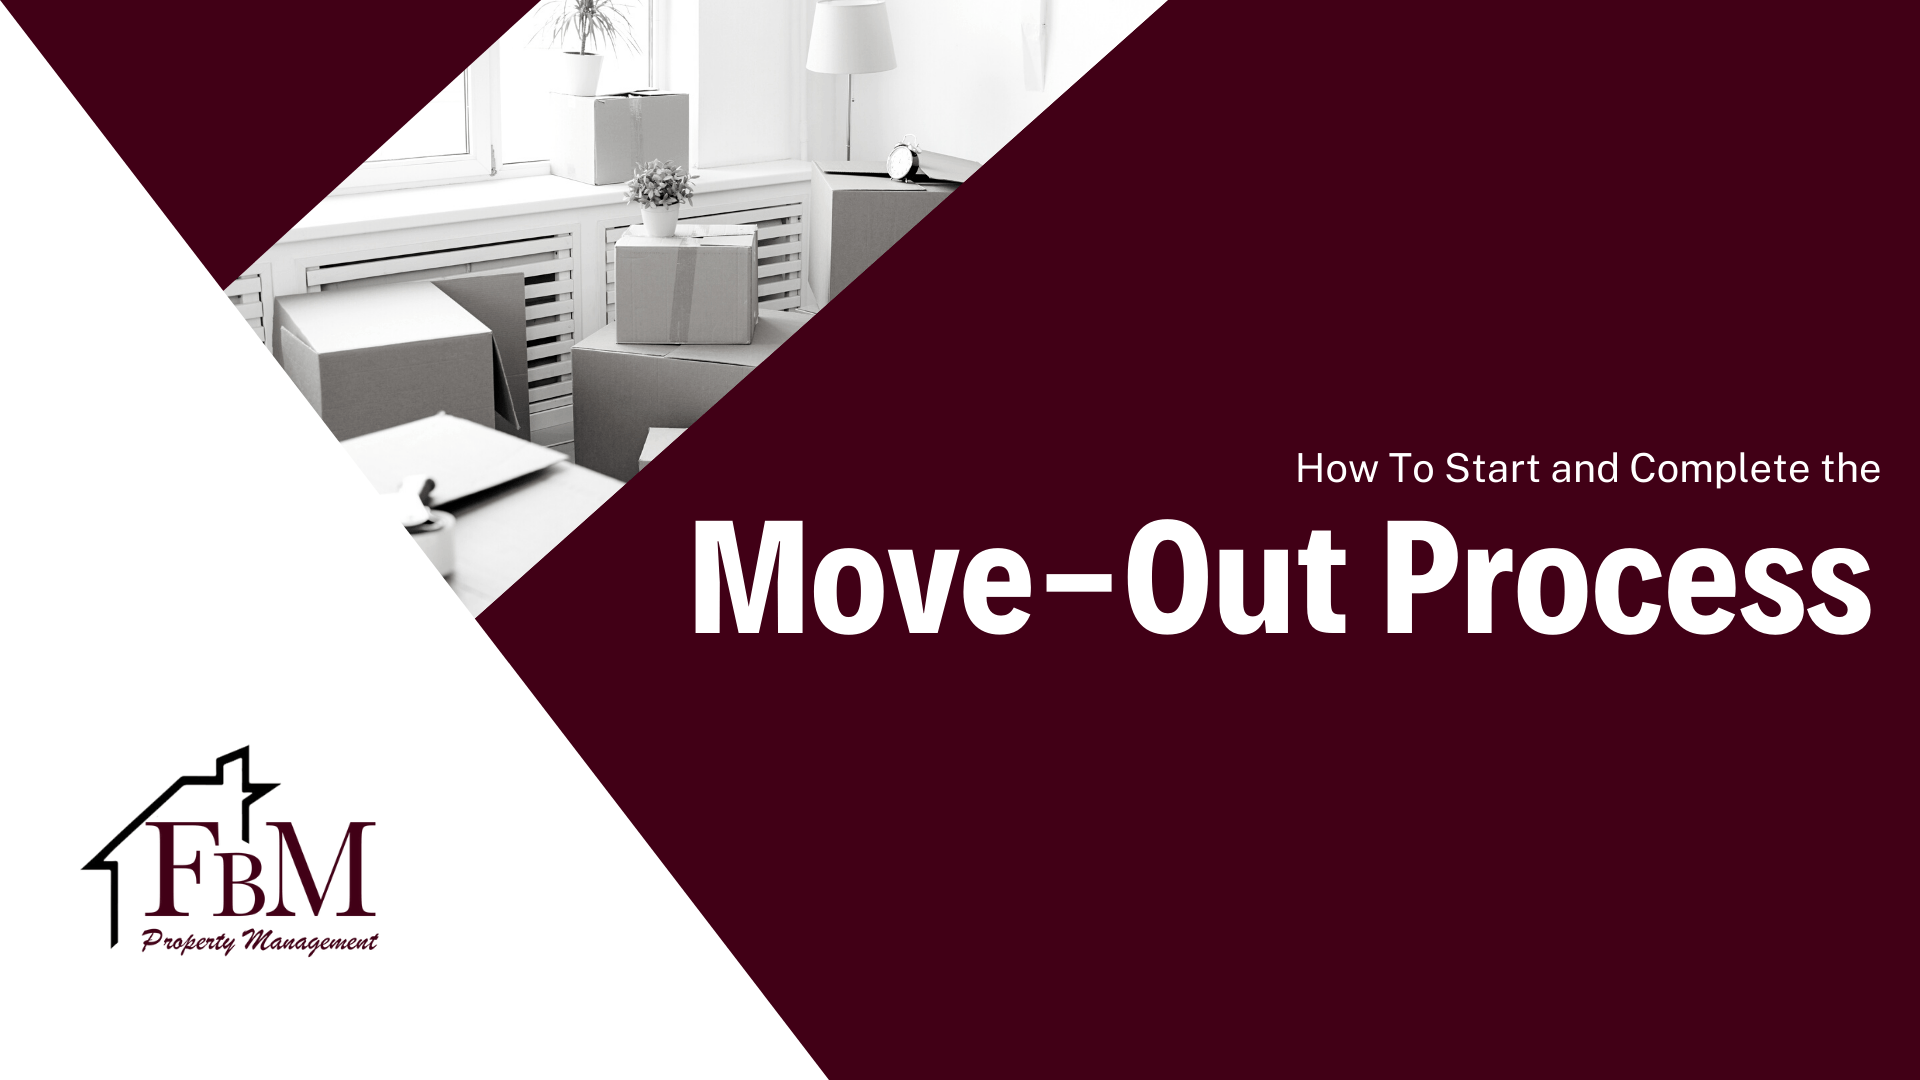 How To Start & Complete the Move Out Process